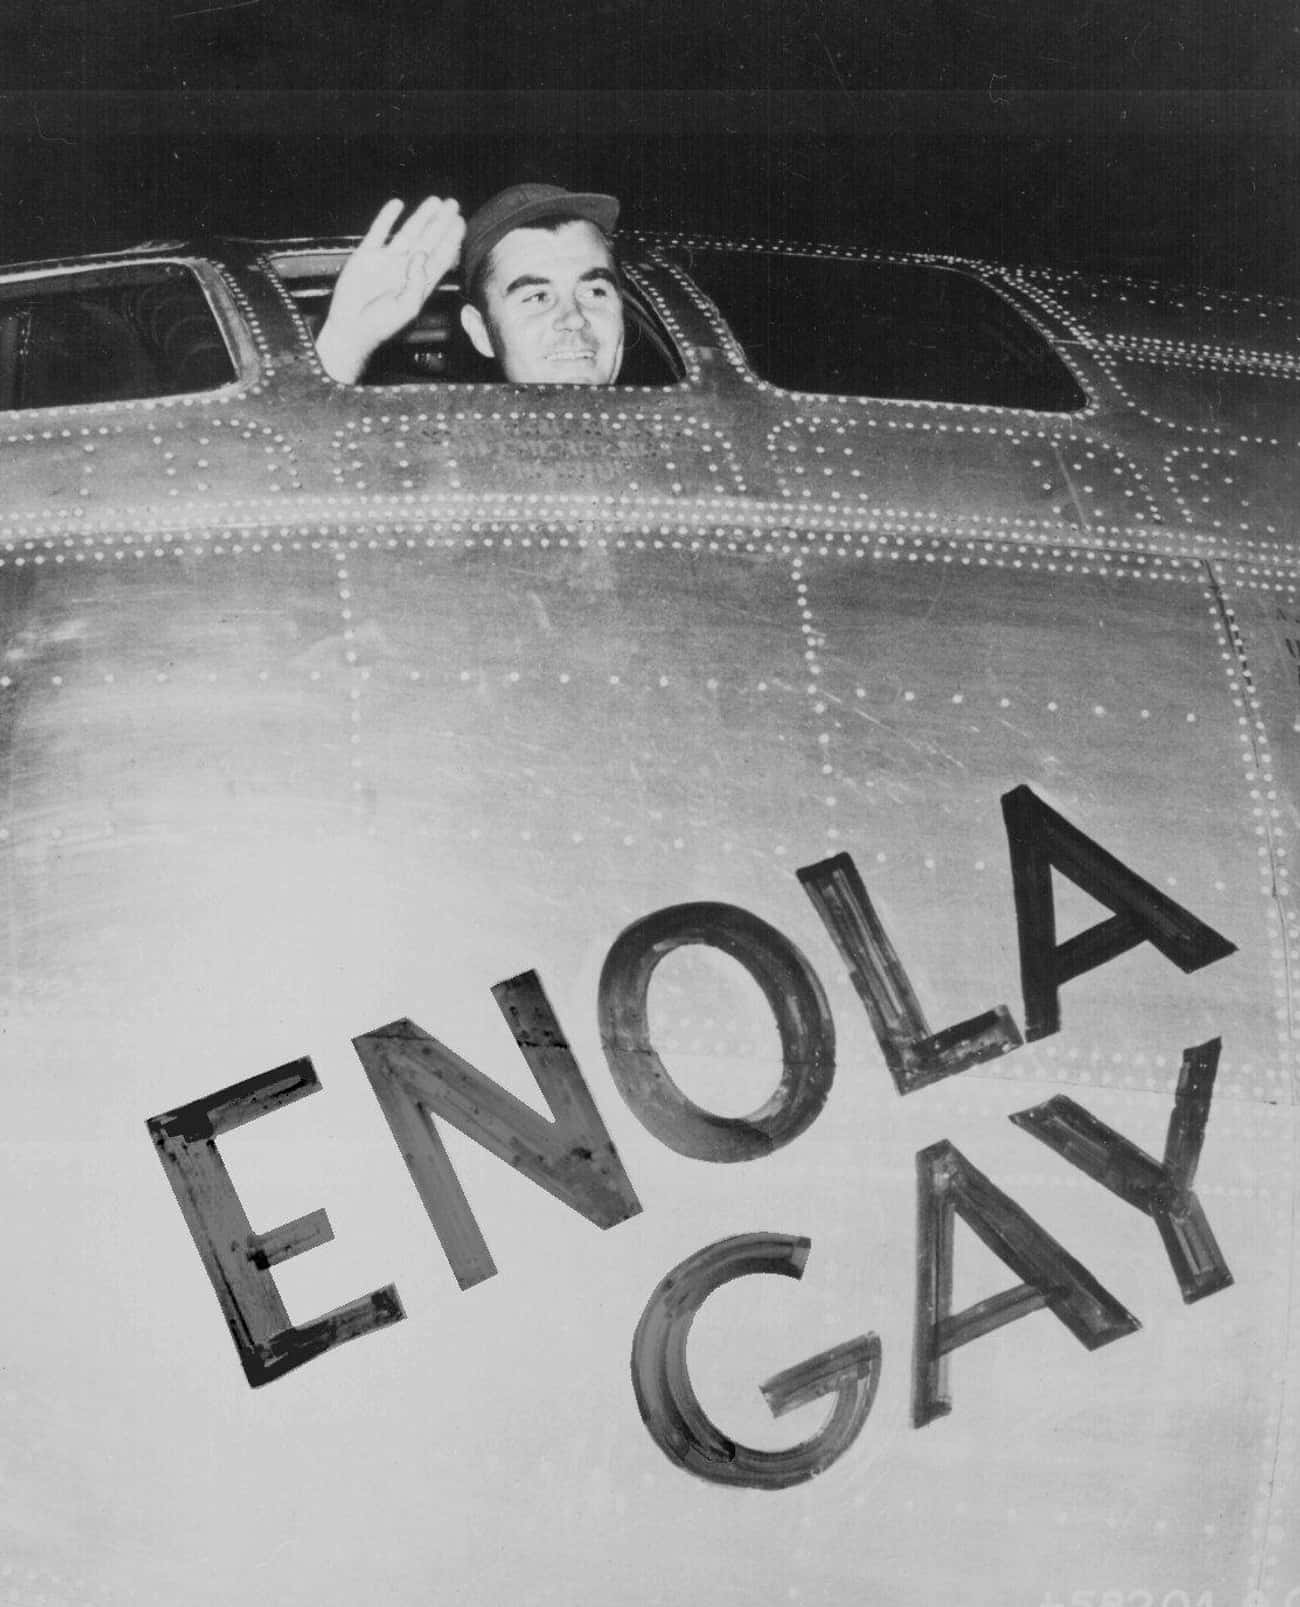 02:45 - The Enola Gay Takes Off From Tinian Island